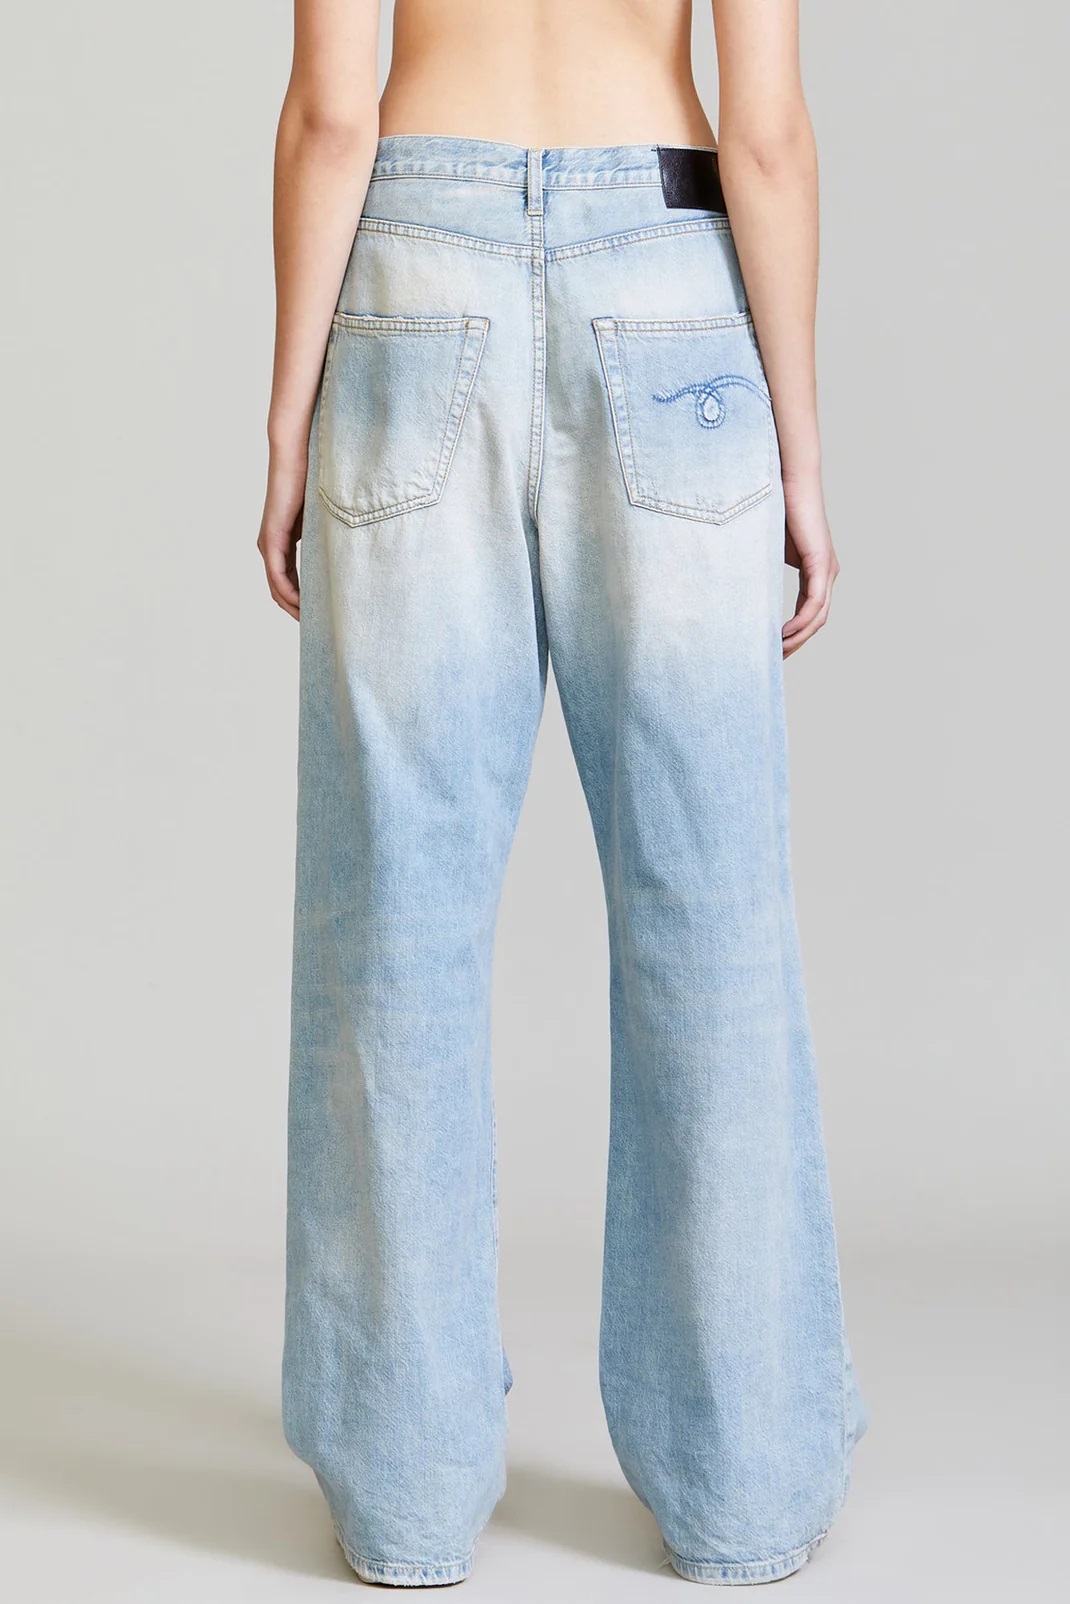 R13 Jeans Damon Pleated Wide Leg Light Blue Washed